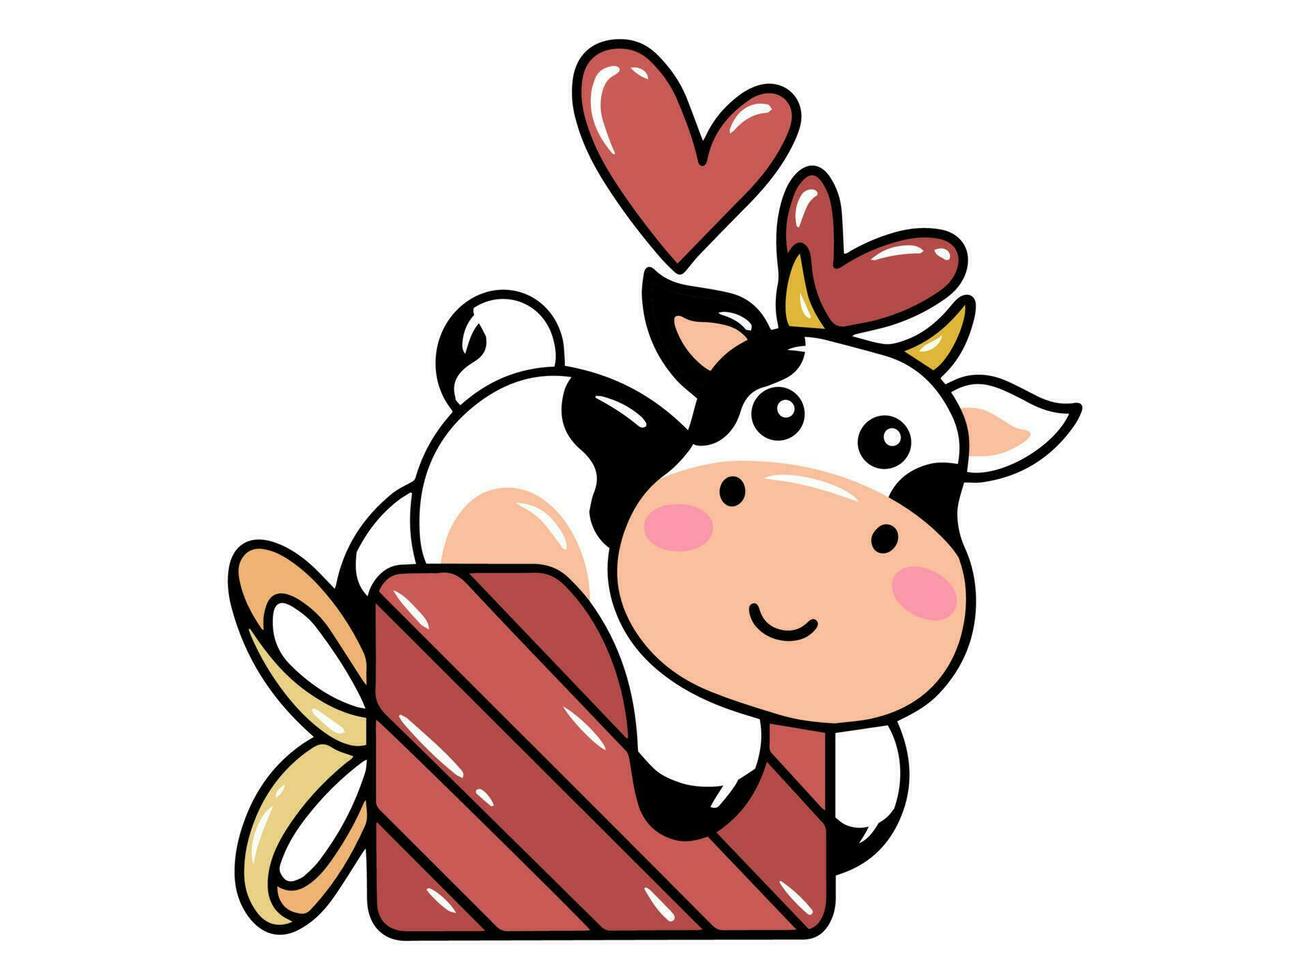 Cow Cartoon Cute for Valentines Day vector